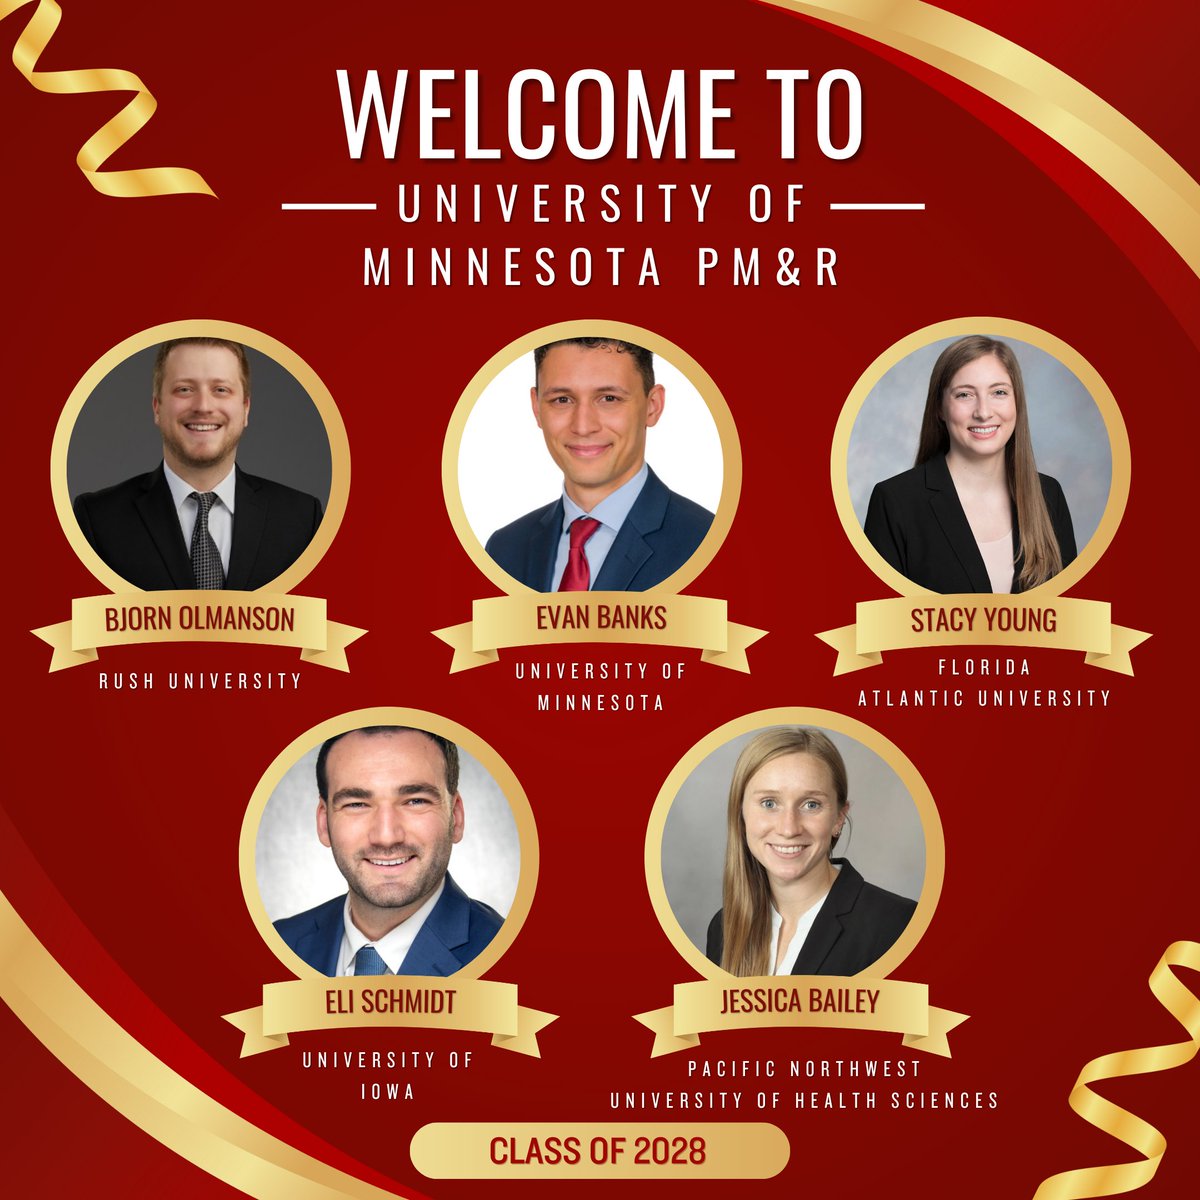 🎉 Please give a WARM MINNESOTA WELCOME to the @GopherPMR Class of 2028! 🤩 We are incredibly excited to welcome these five soon-to-be 🌟 exceptional physiatrists 🌟 to the University of Minnesota PM&R family! #pmr  #rehab #MatchDay2024 #match2024 #Physiatry #GoGophers (1/2)